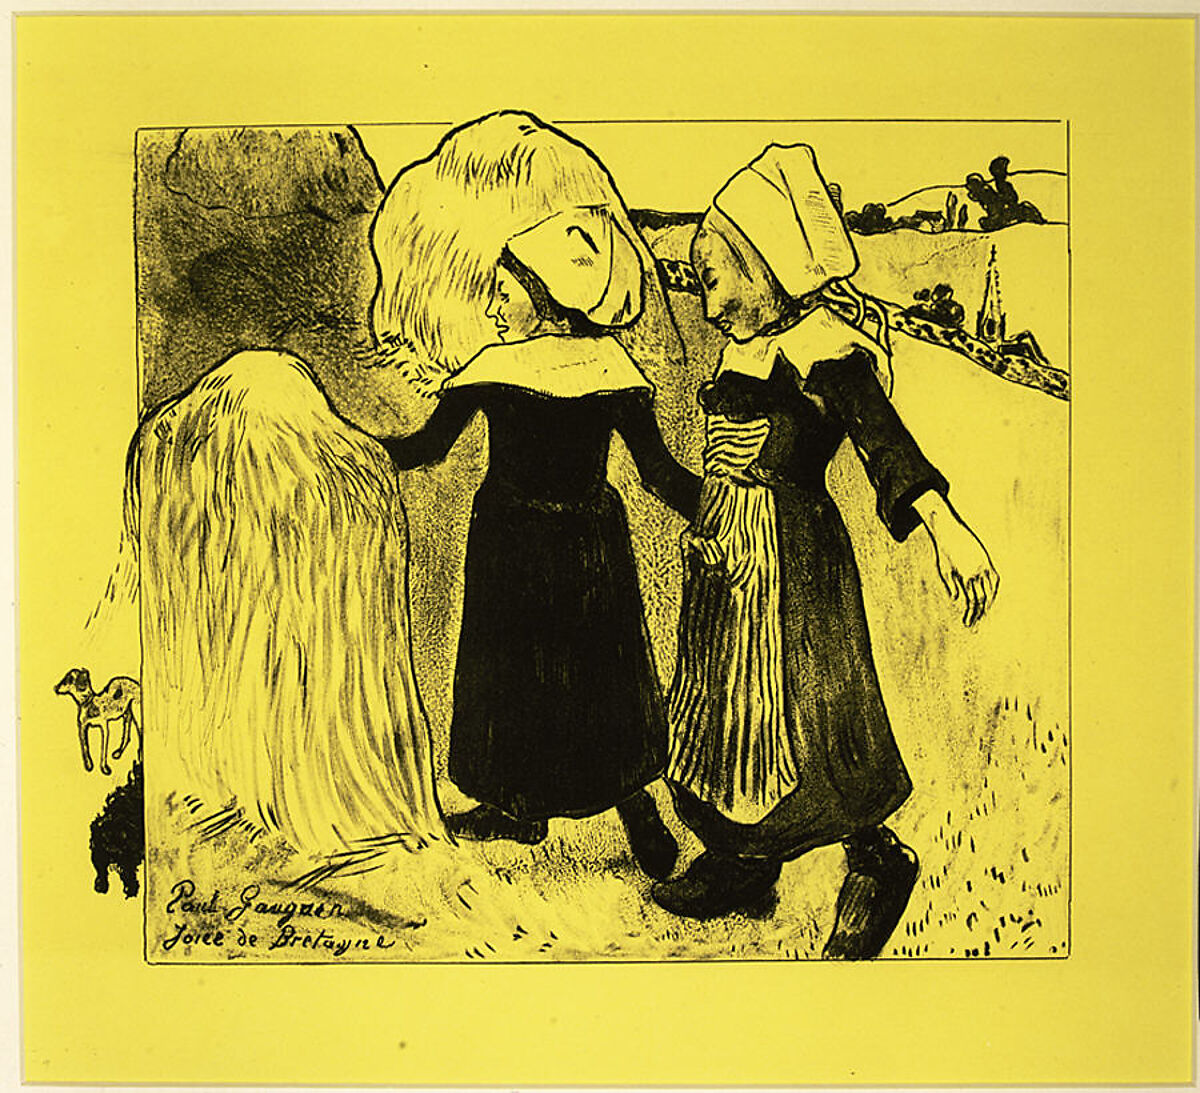 The Joys of Brittany, from the "Volpini Suite: Dessins lithographiques", Paul Gauguin  French, Zincograph on chrome yellow wove paper; first edition